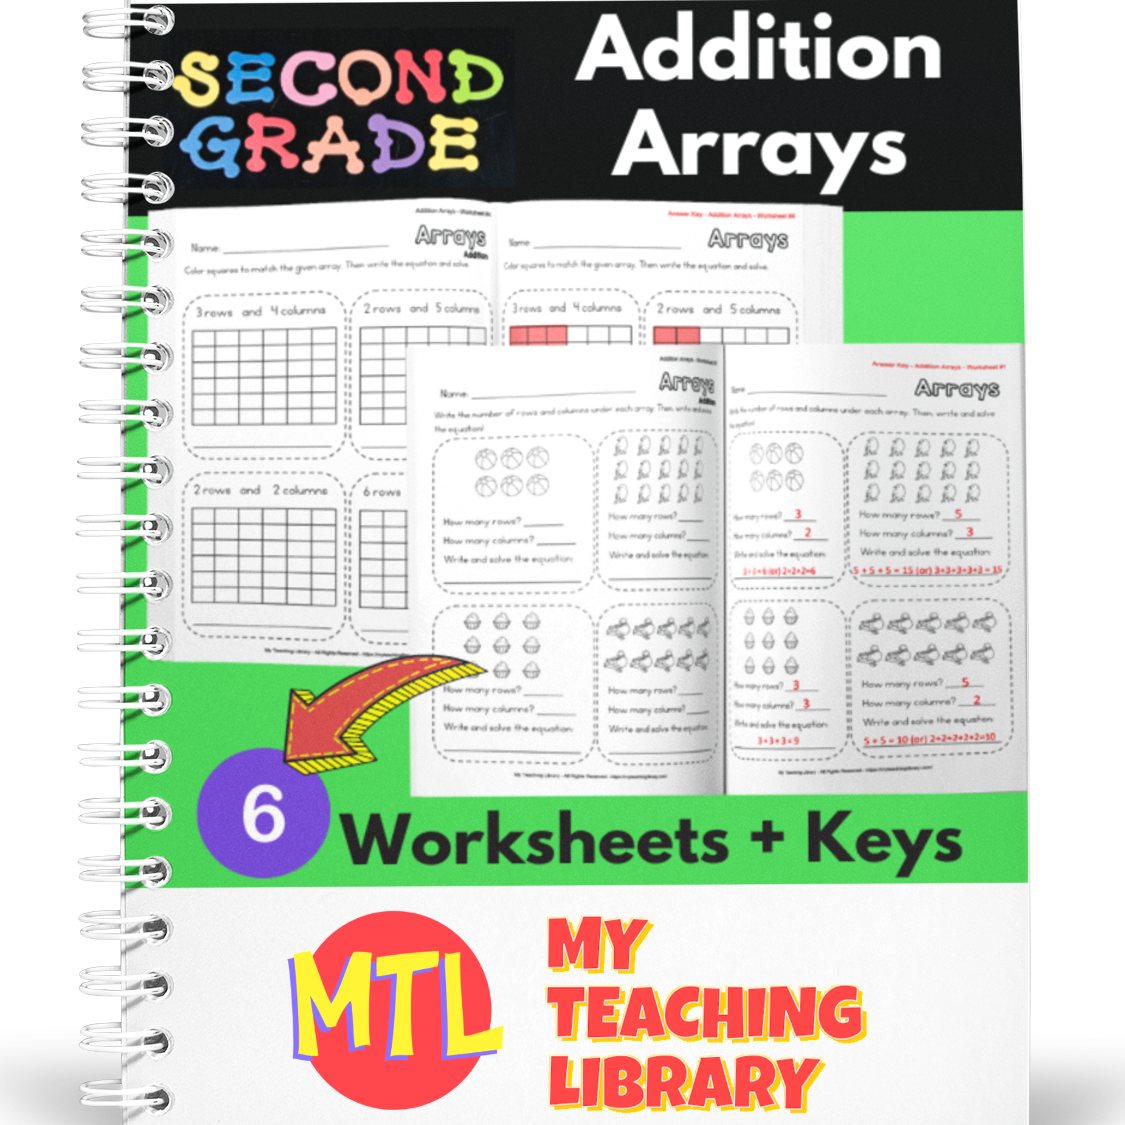 z 318 Addition Array Worksheets cover